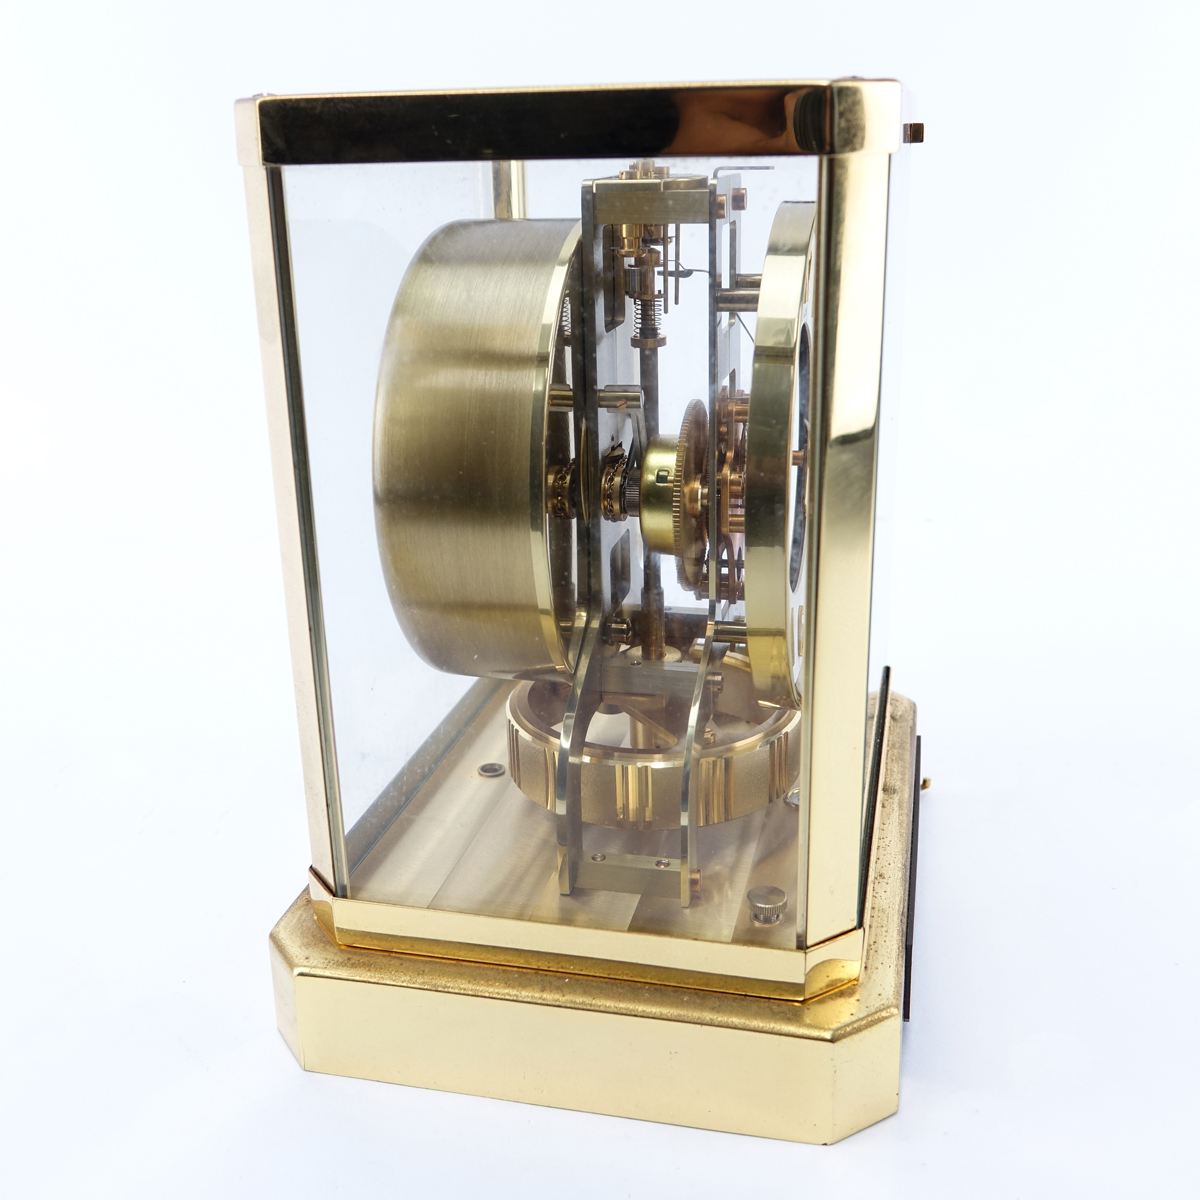 Jaeger LeCoultre Atmos Clock. Housed in brass and glass case.